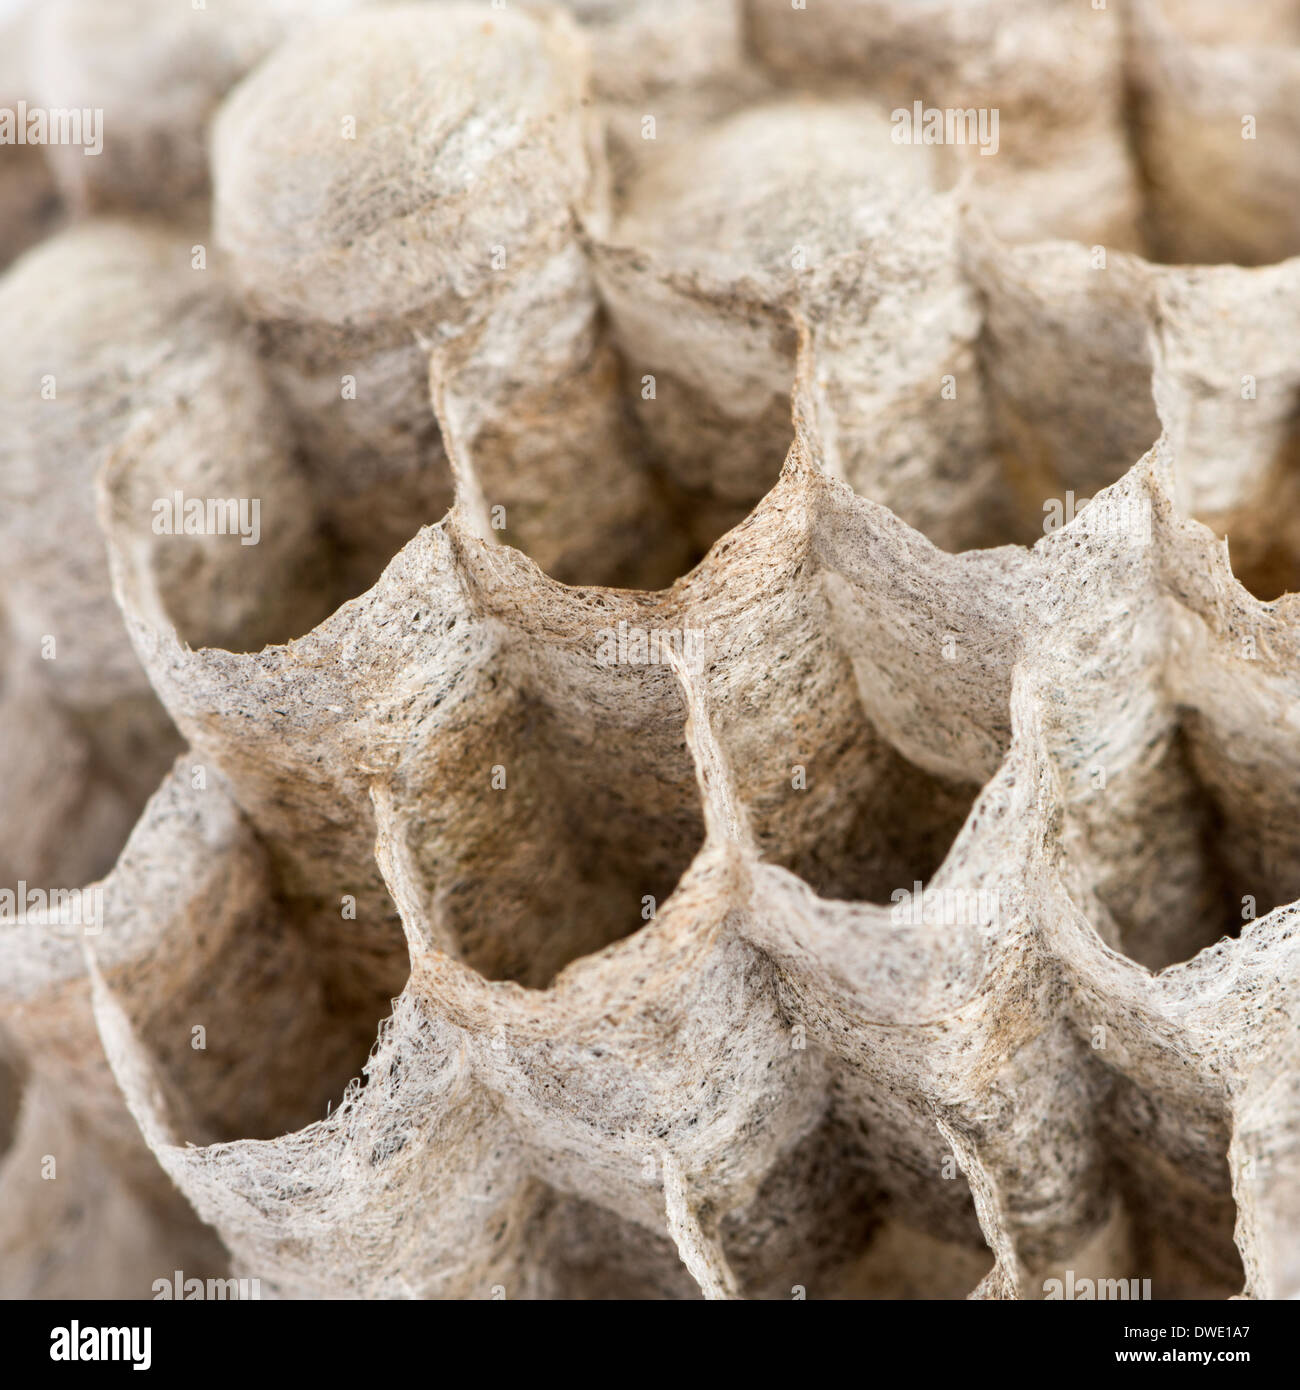 Close-up of a dry vespiary's cells Stock Photo